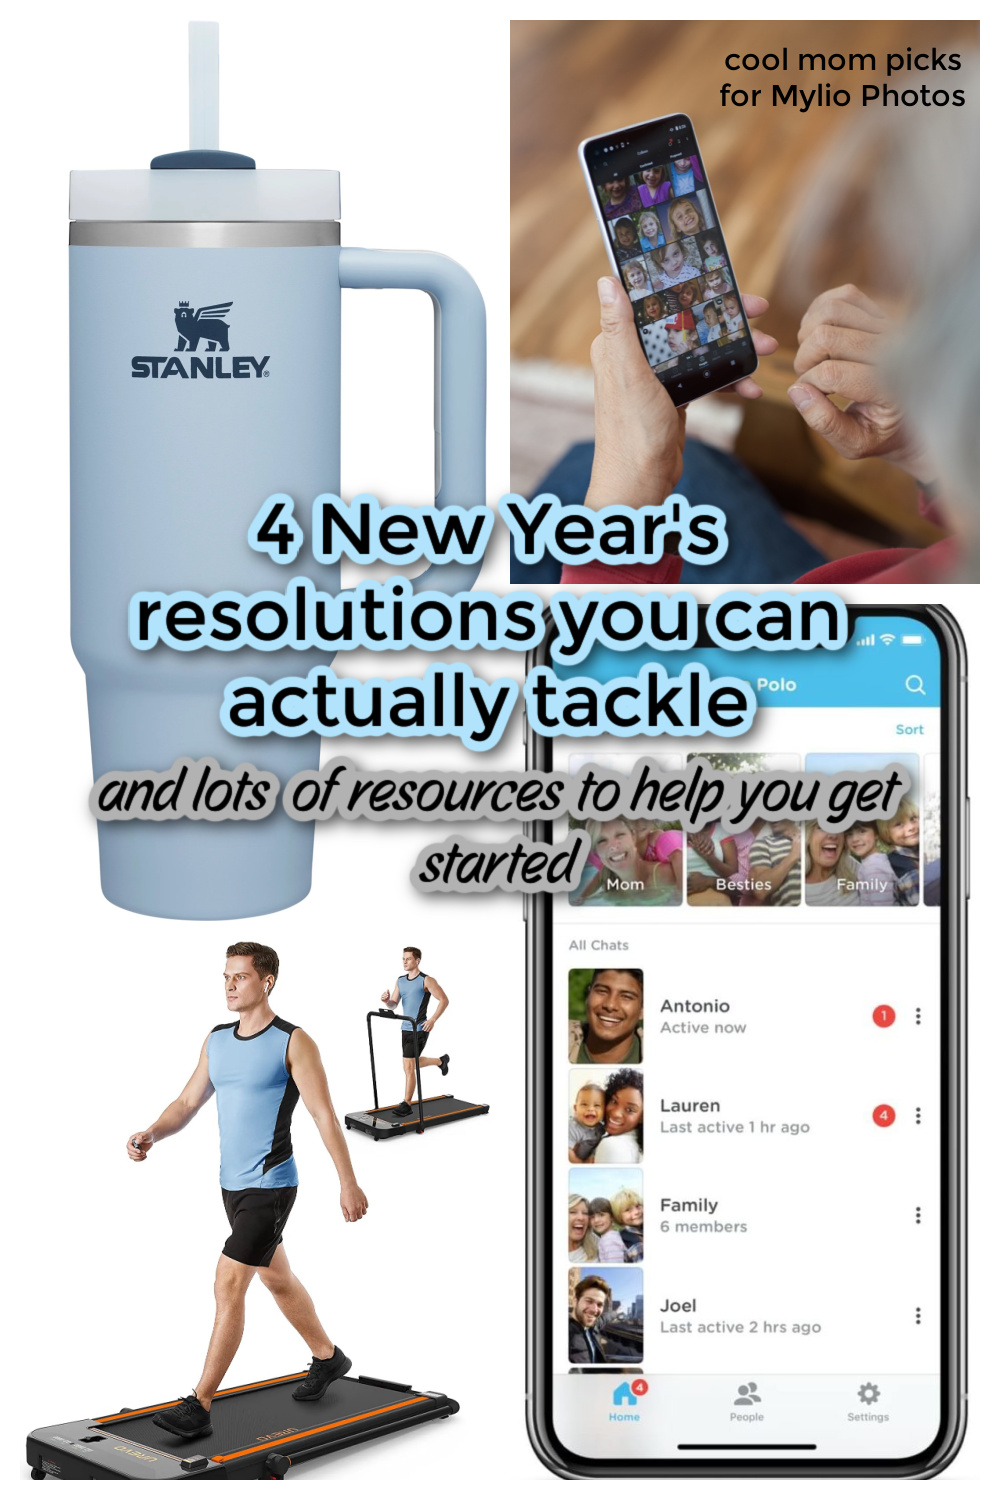 4 New Year's resolutions you can actually tackle and lots of resources to help | Sponsored by Mylio Photos